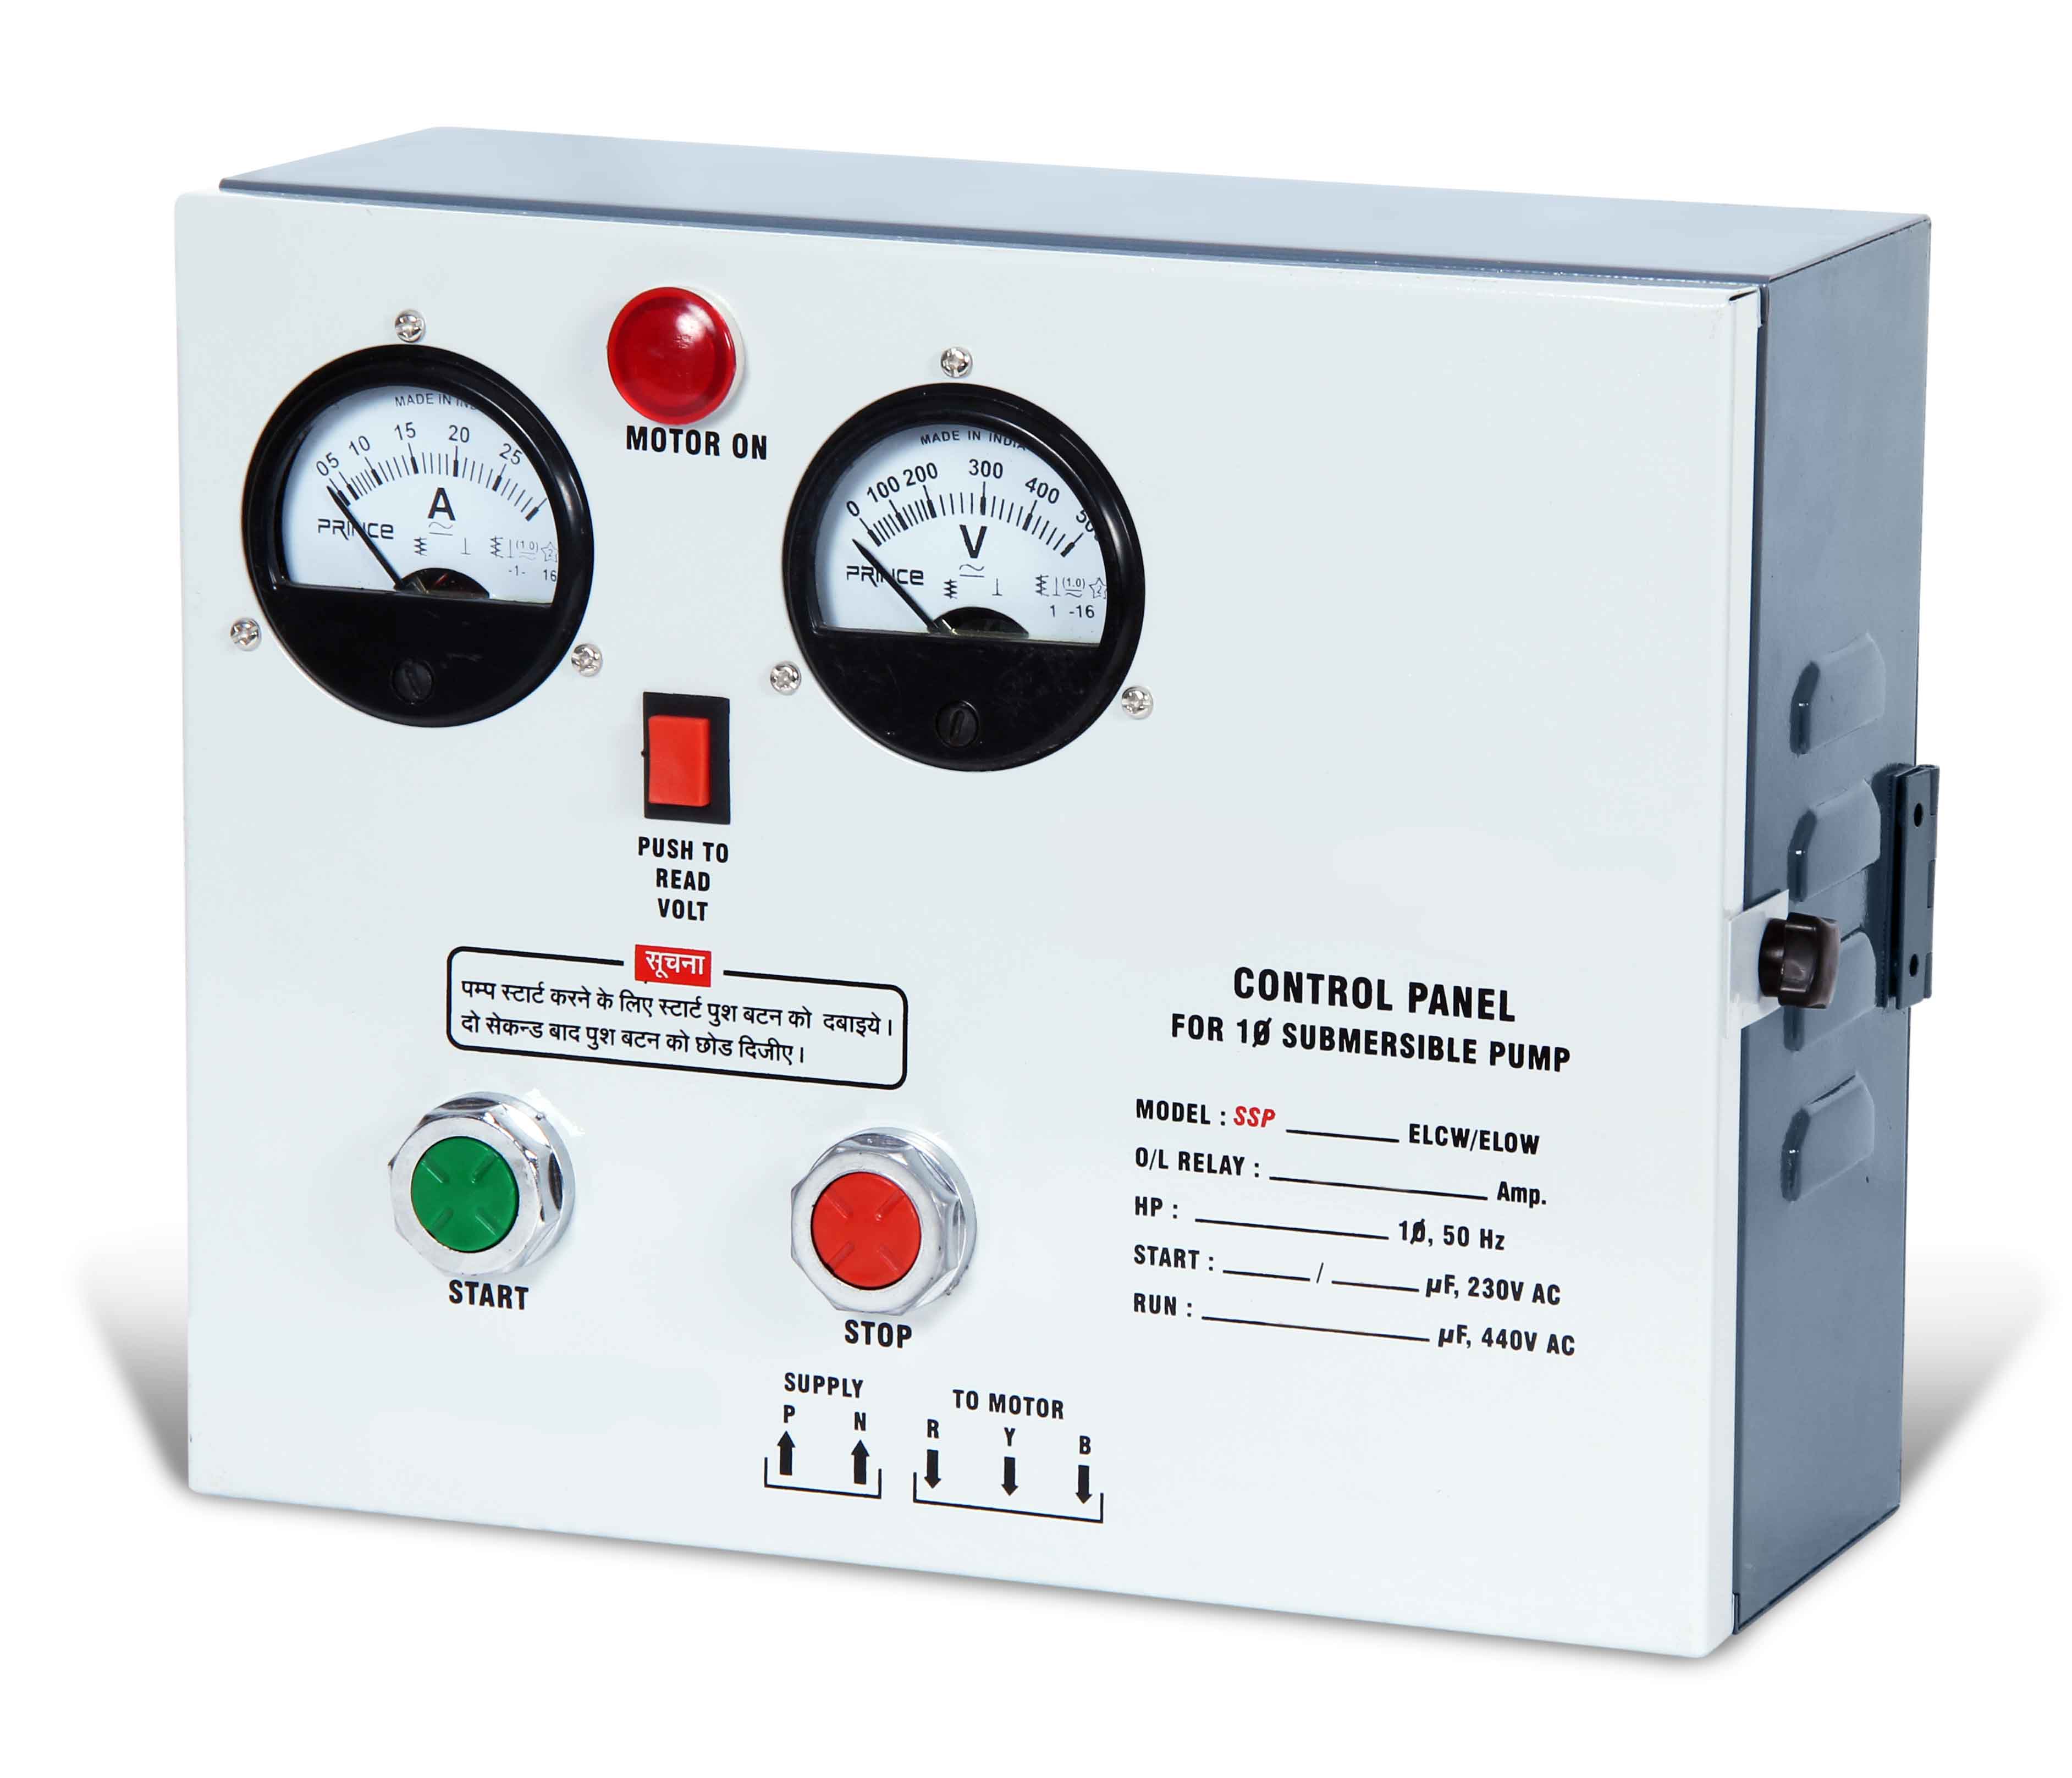 ELCW ECO Single phase motor starter suitable for 2 HP submersible motor with overload protections by bi metallic relay